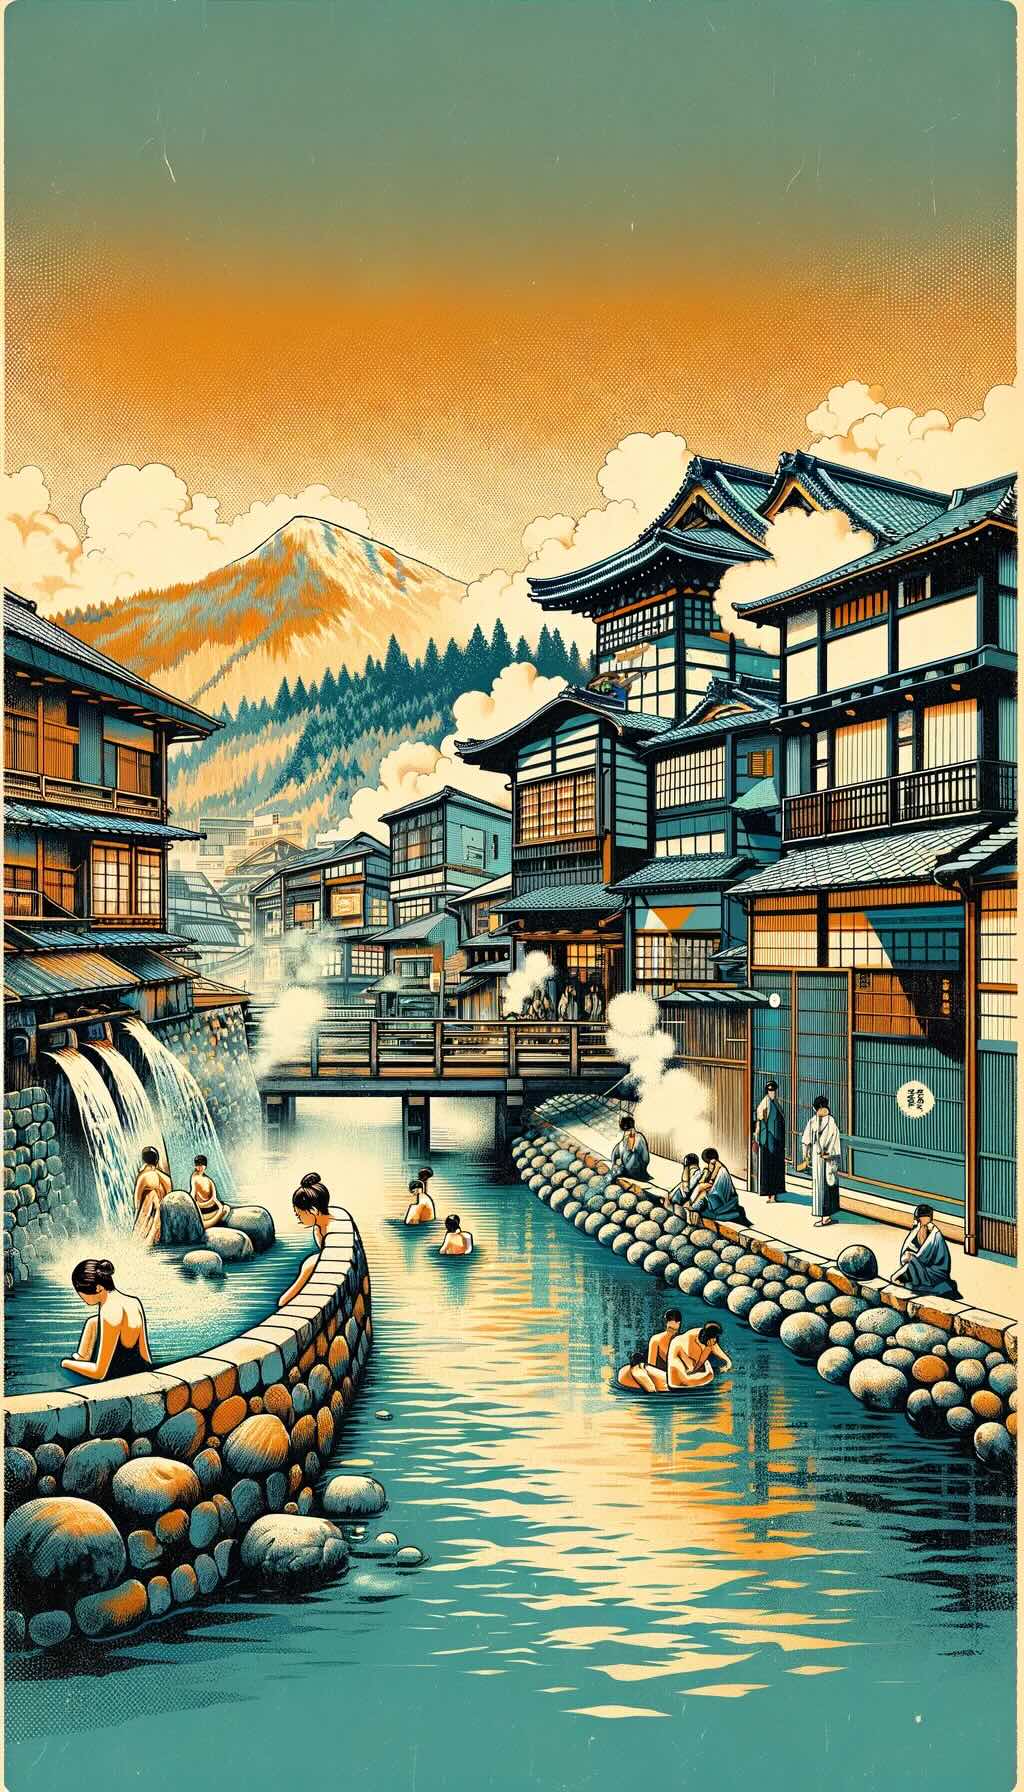 Heartland of onsen culture in Central Japan captures the essence of Kusatsu Onsen in Gunma Prefecture, highlighting its sulfuric waters and the Yubatake, along with the serene atmosphere of Shibu Onsen's historic charm and traditional ryokans vividly represents the blend of relaxation, tradition, and the distinct character of these renowned hot springs in Central Japan.